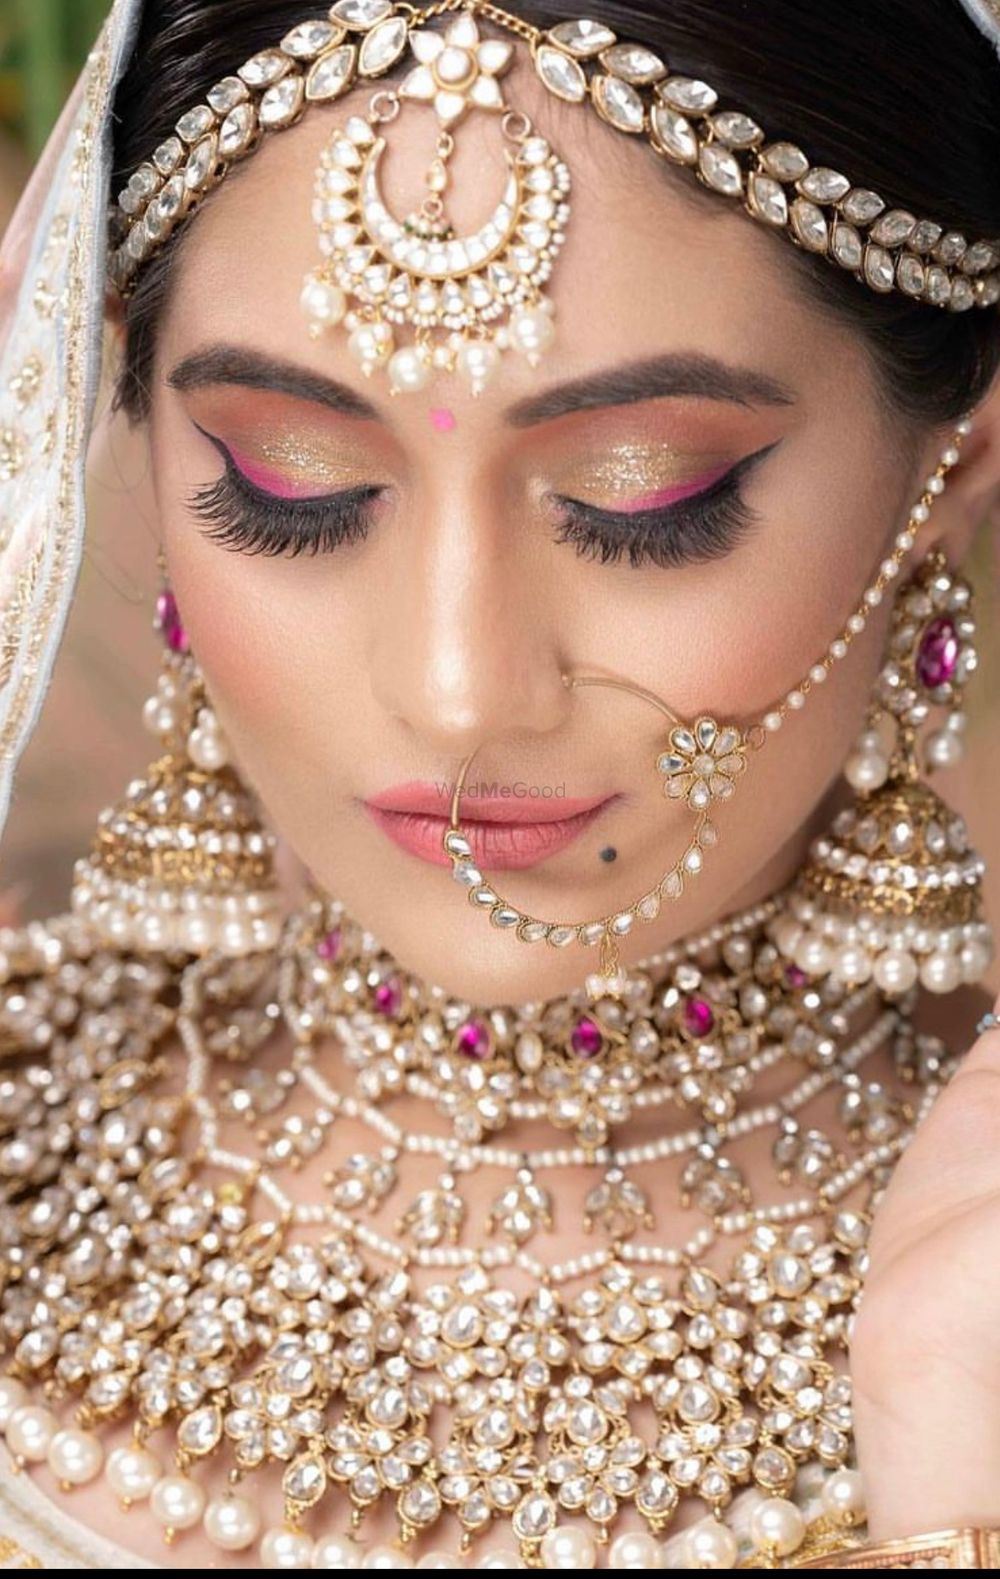 Photo From “Brides all over” - By Makeup Artistry by Simran